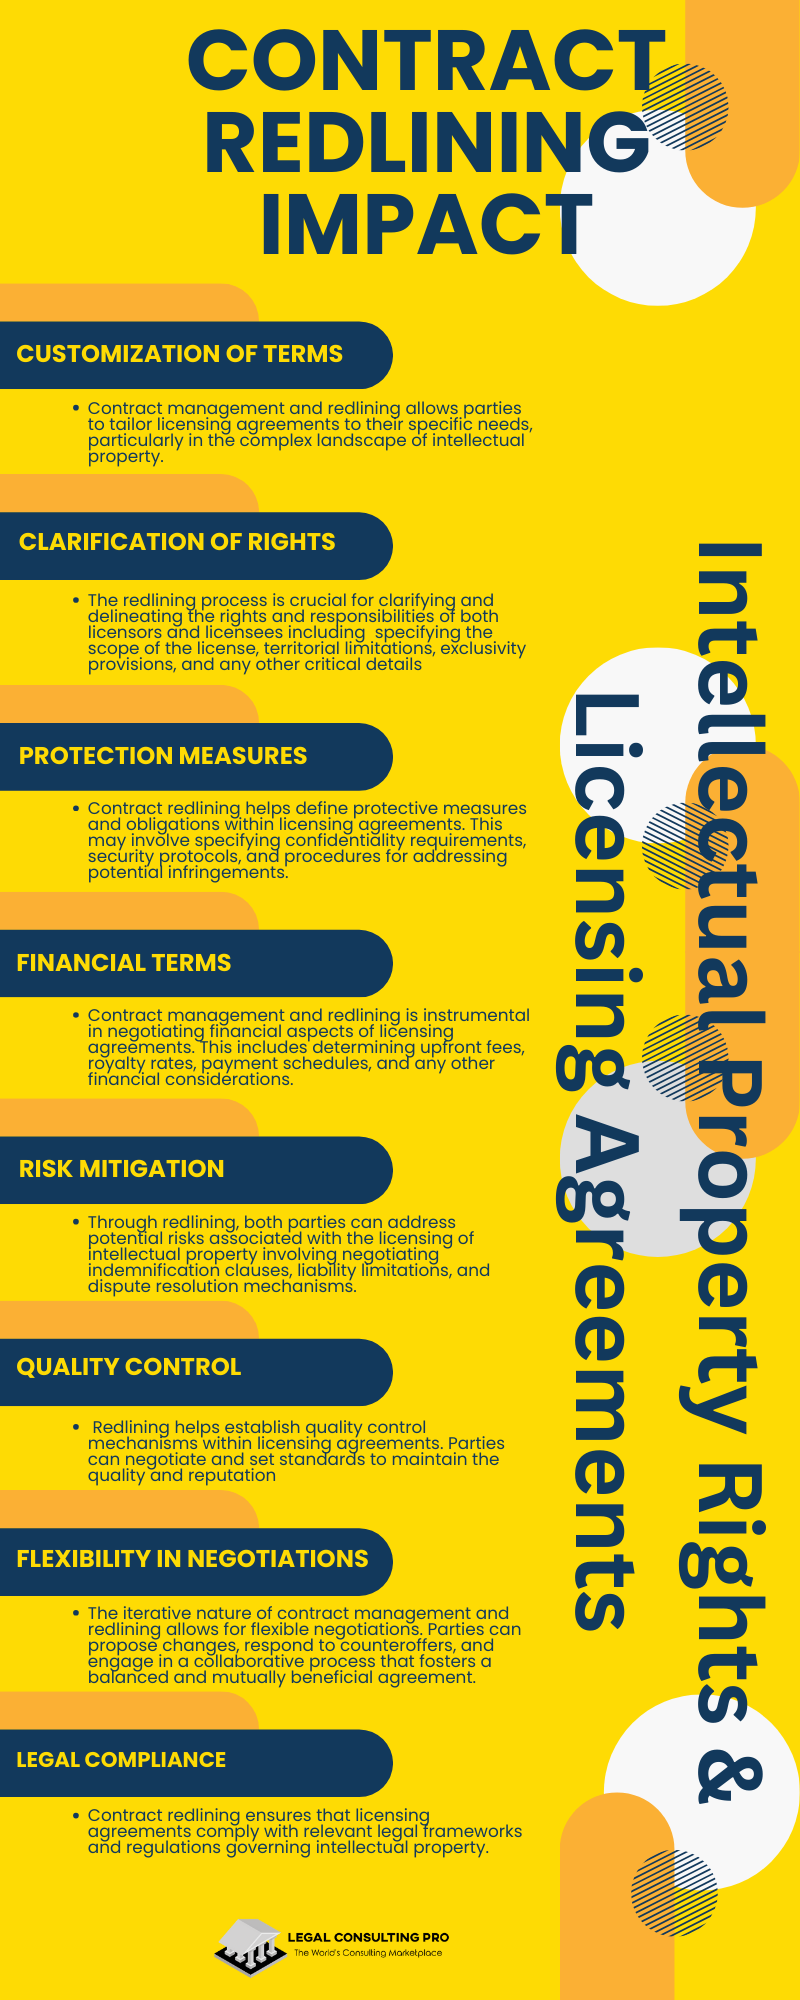 Impact of Contract Redlining in Intellectual Property Rights and Licensing Agreements Infographic